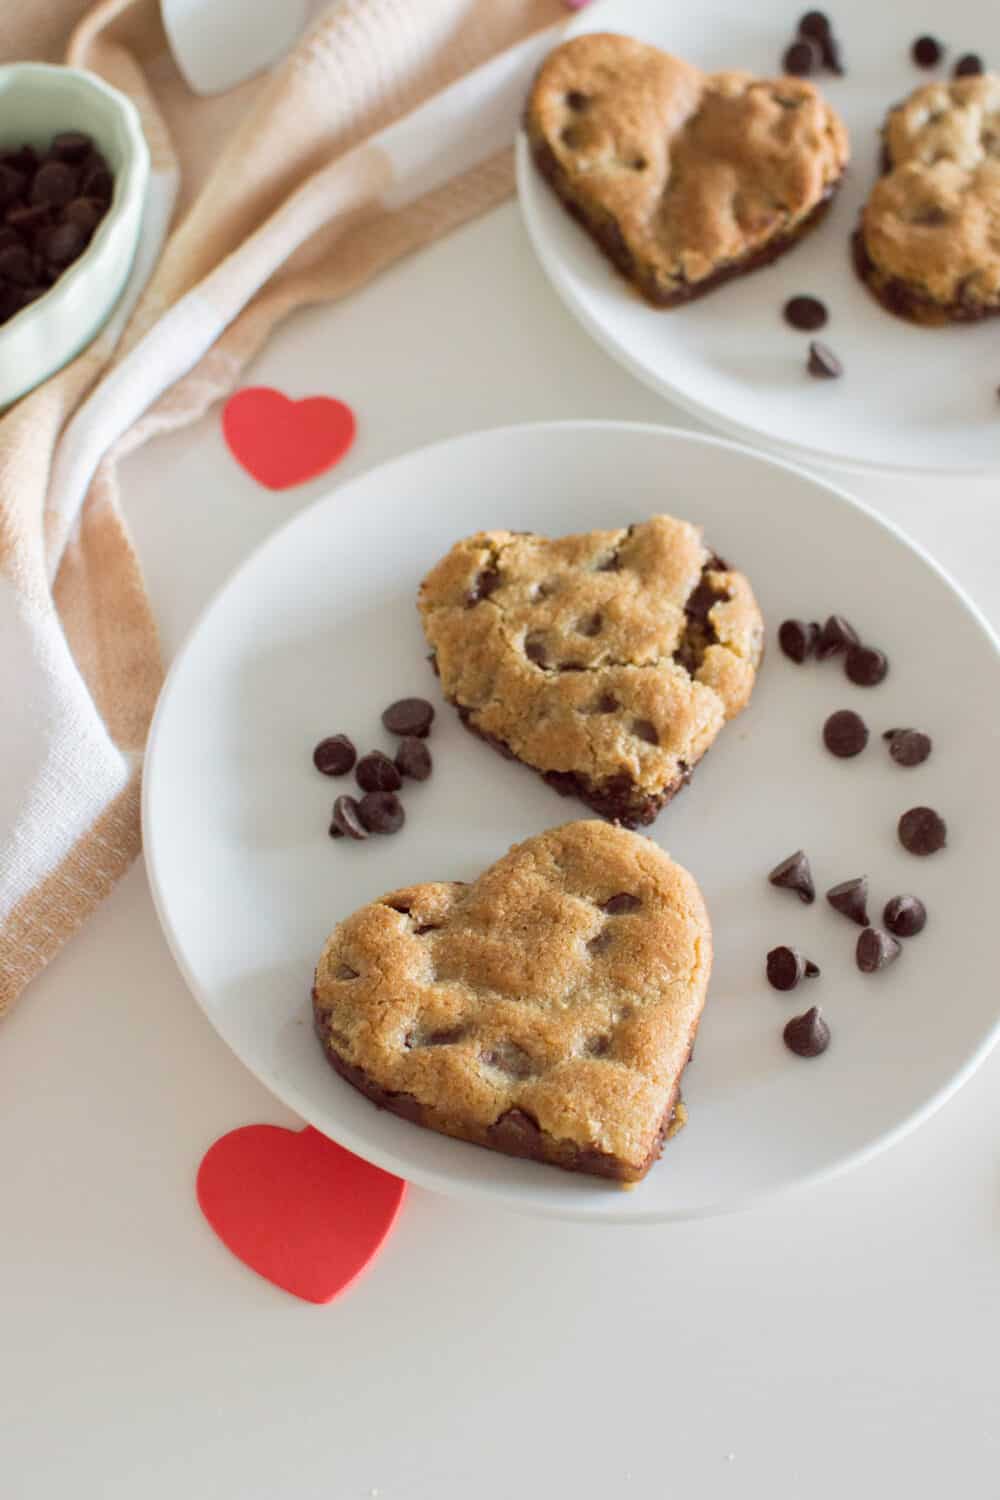 Heart-shaped chocolate chip cookies on a white plate, surrounded by chocolate chips